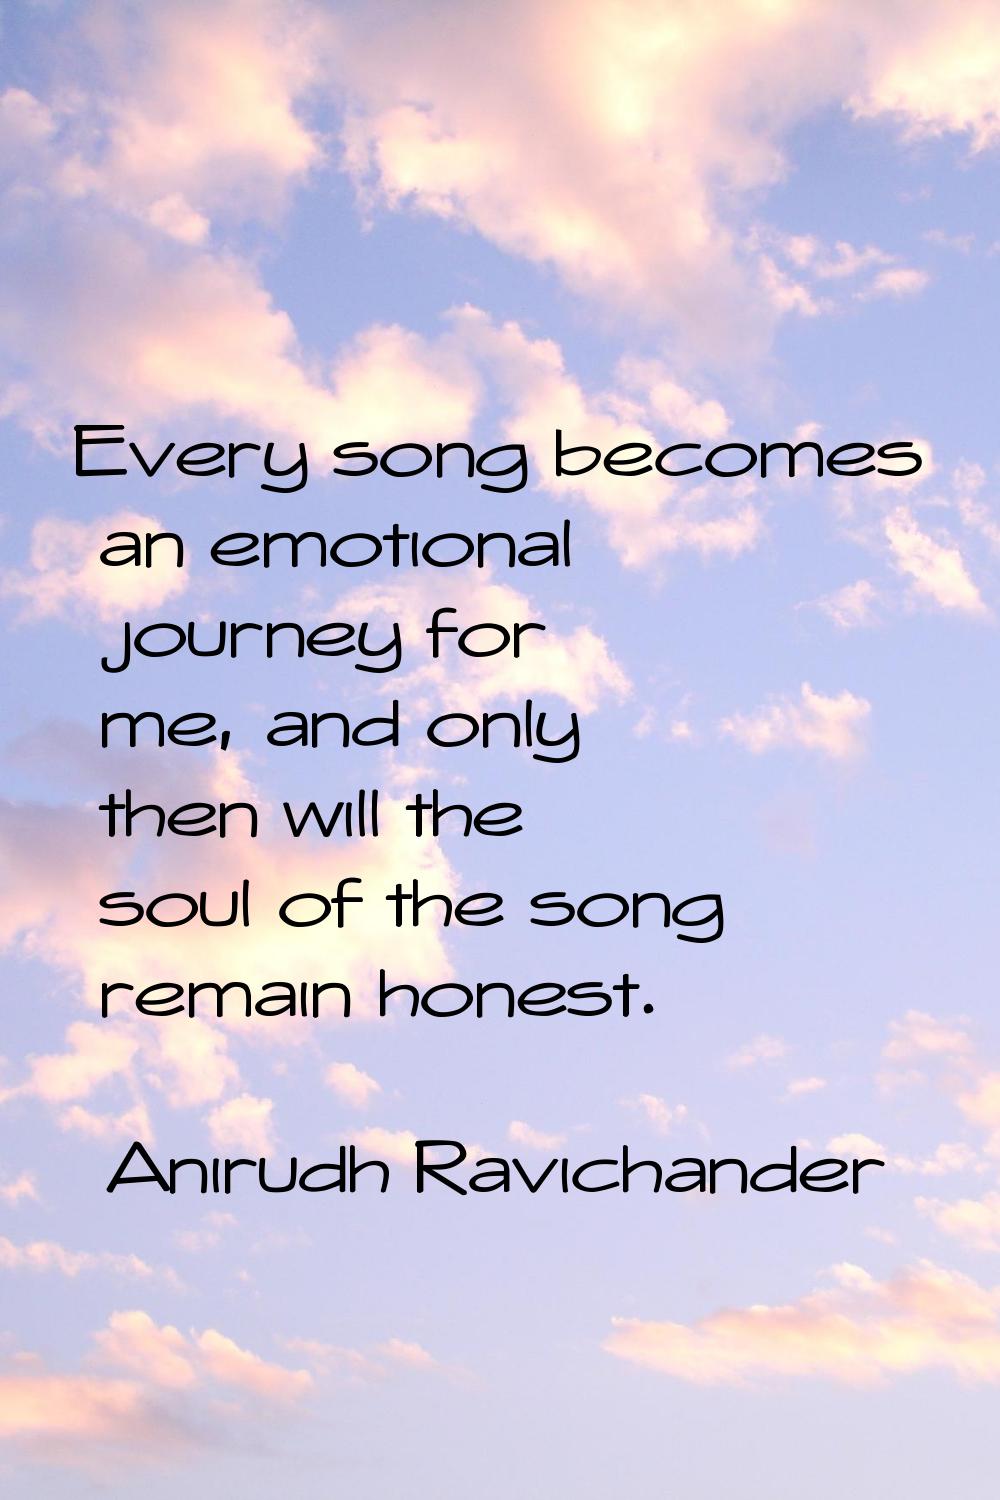 Every song becomes an emotional journey for me, and only then will the soul of the song remain hone